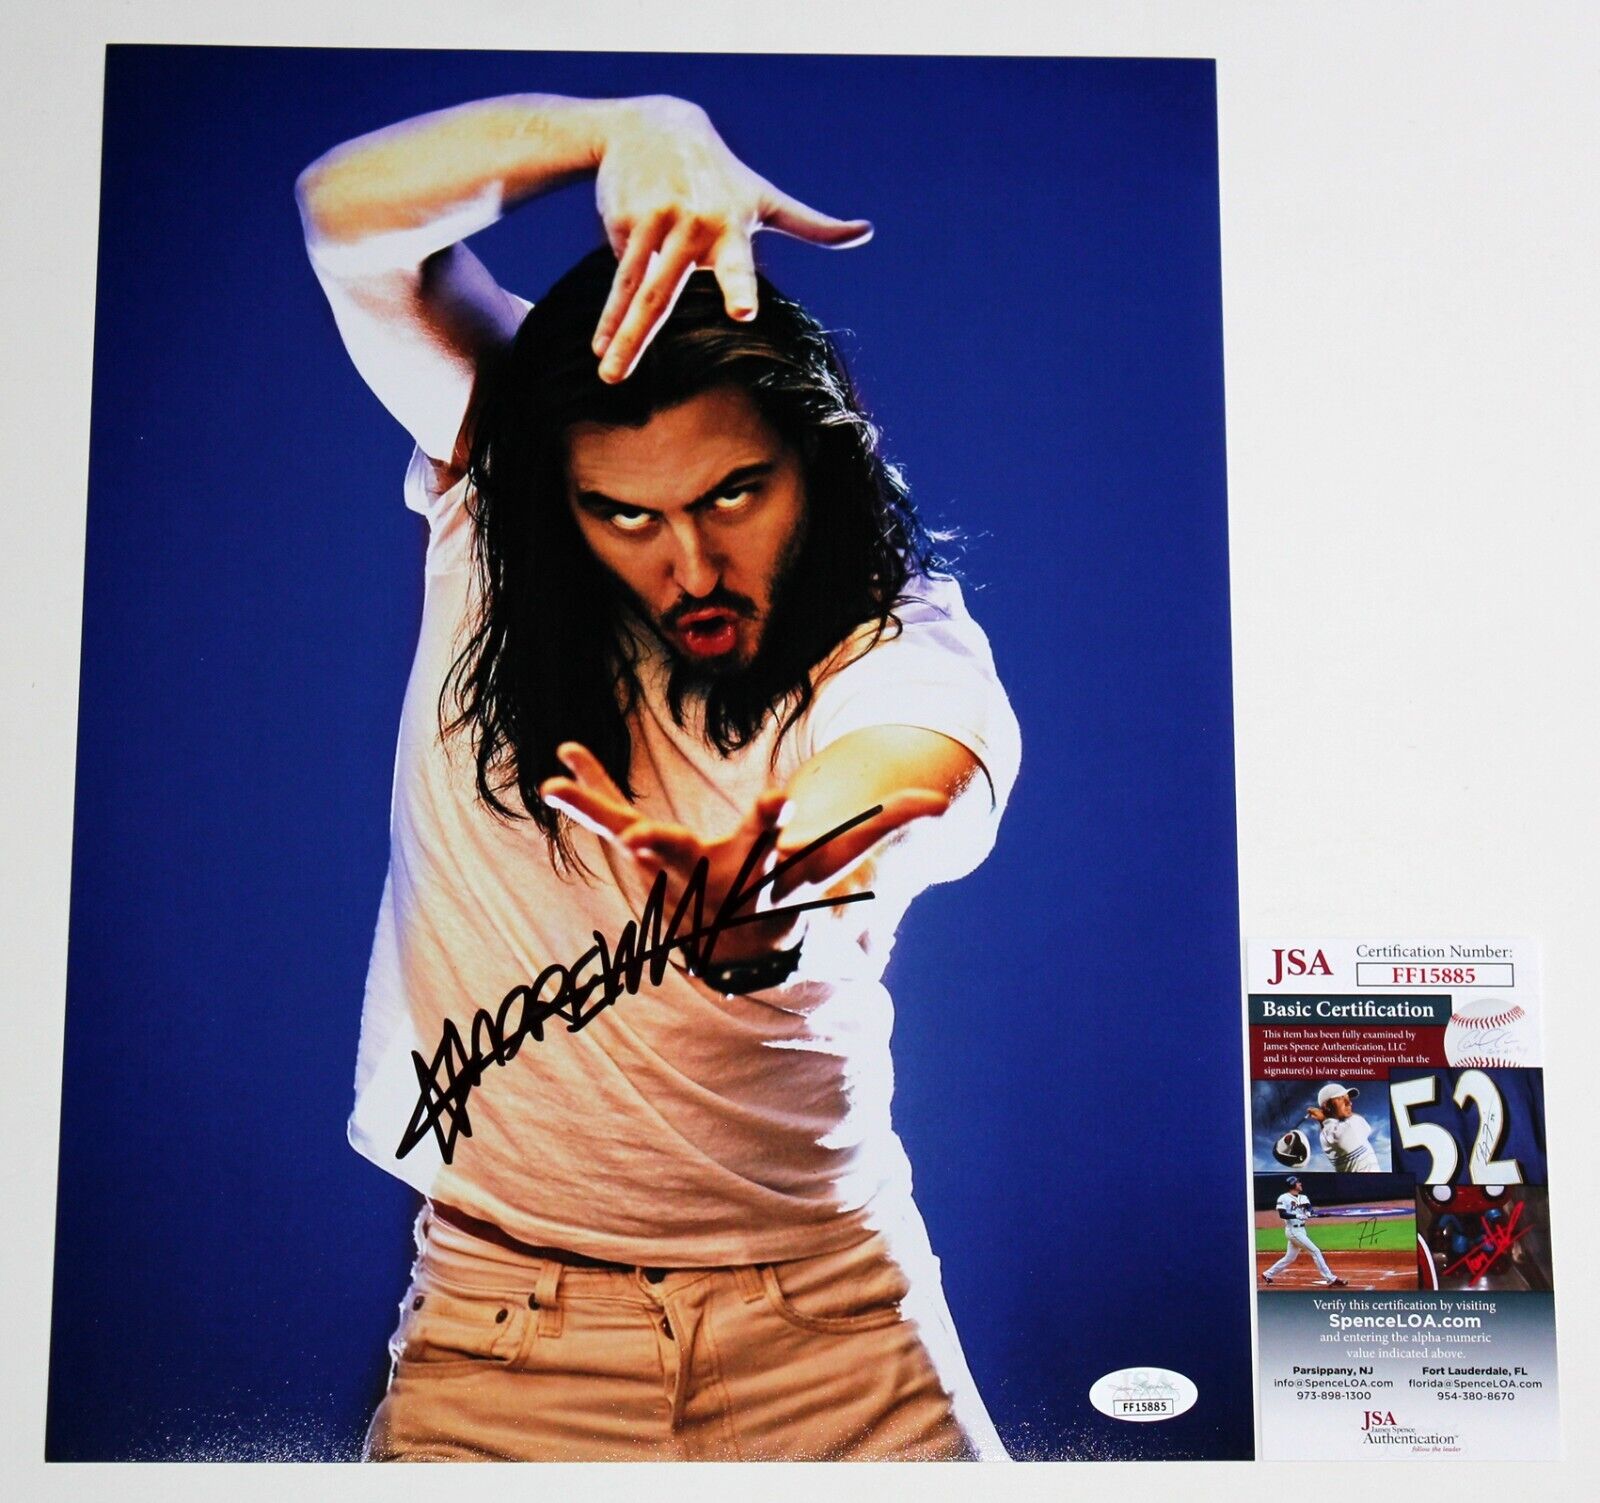 ANDREW WK SIGNED 11x14 PHOTO SINGER W.K. PARTY HARD AUTOGRAPHED RARE +JSA COA